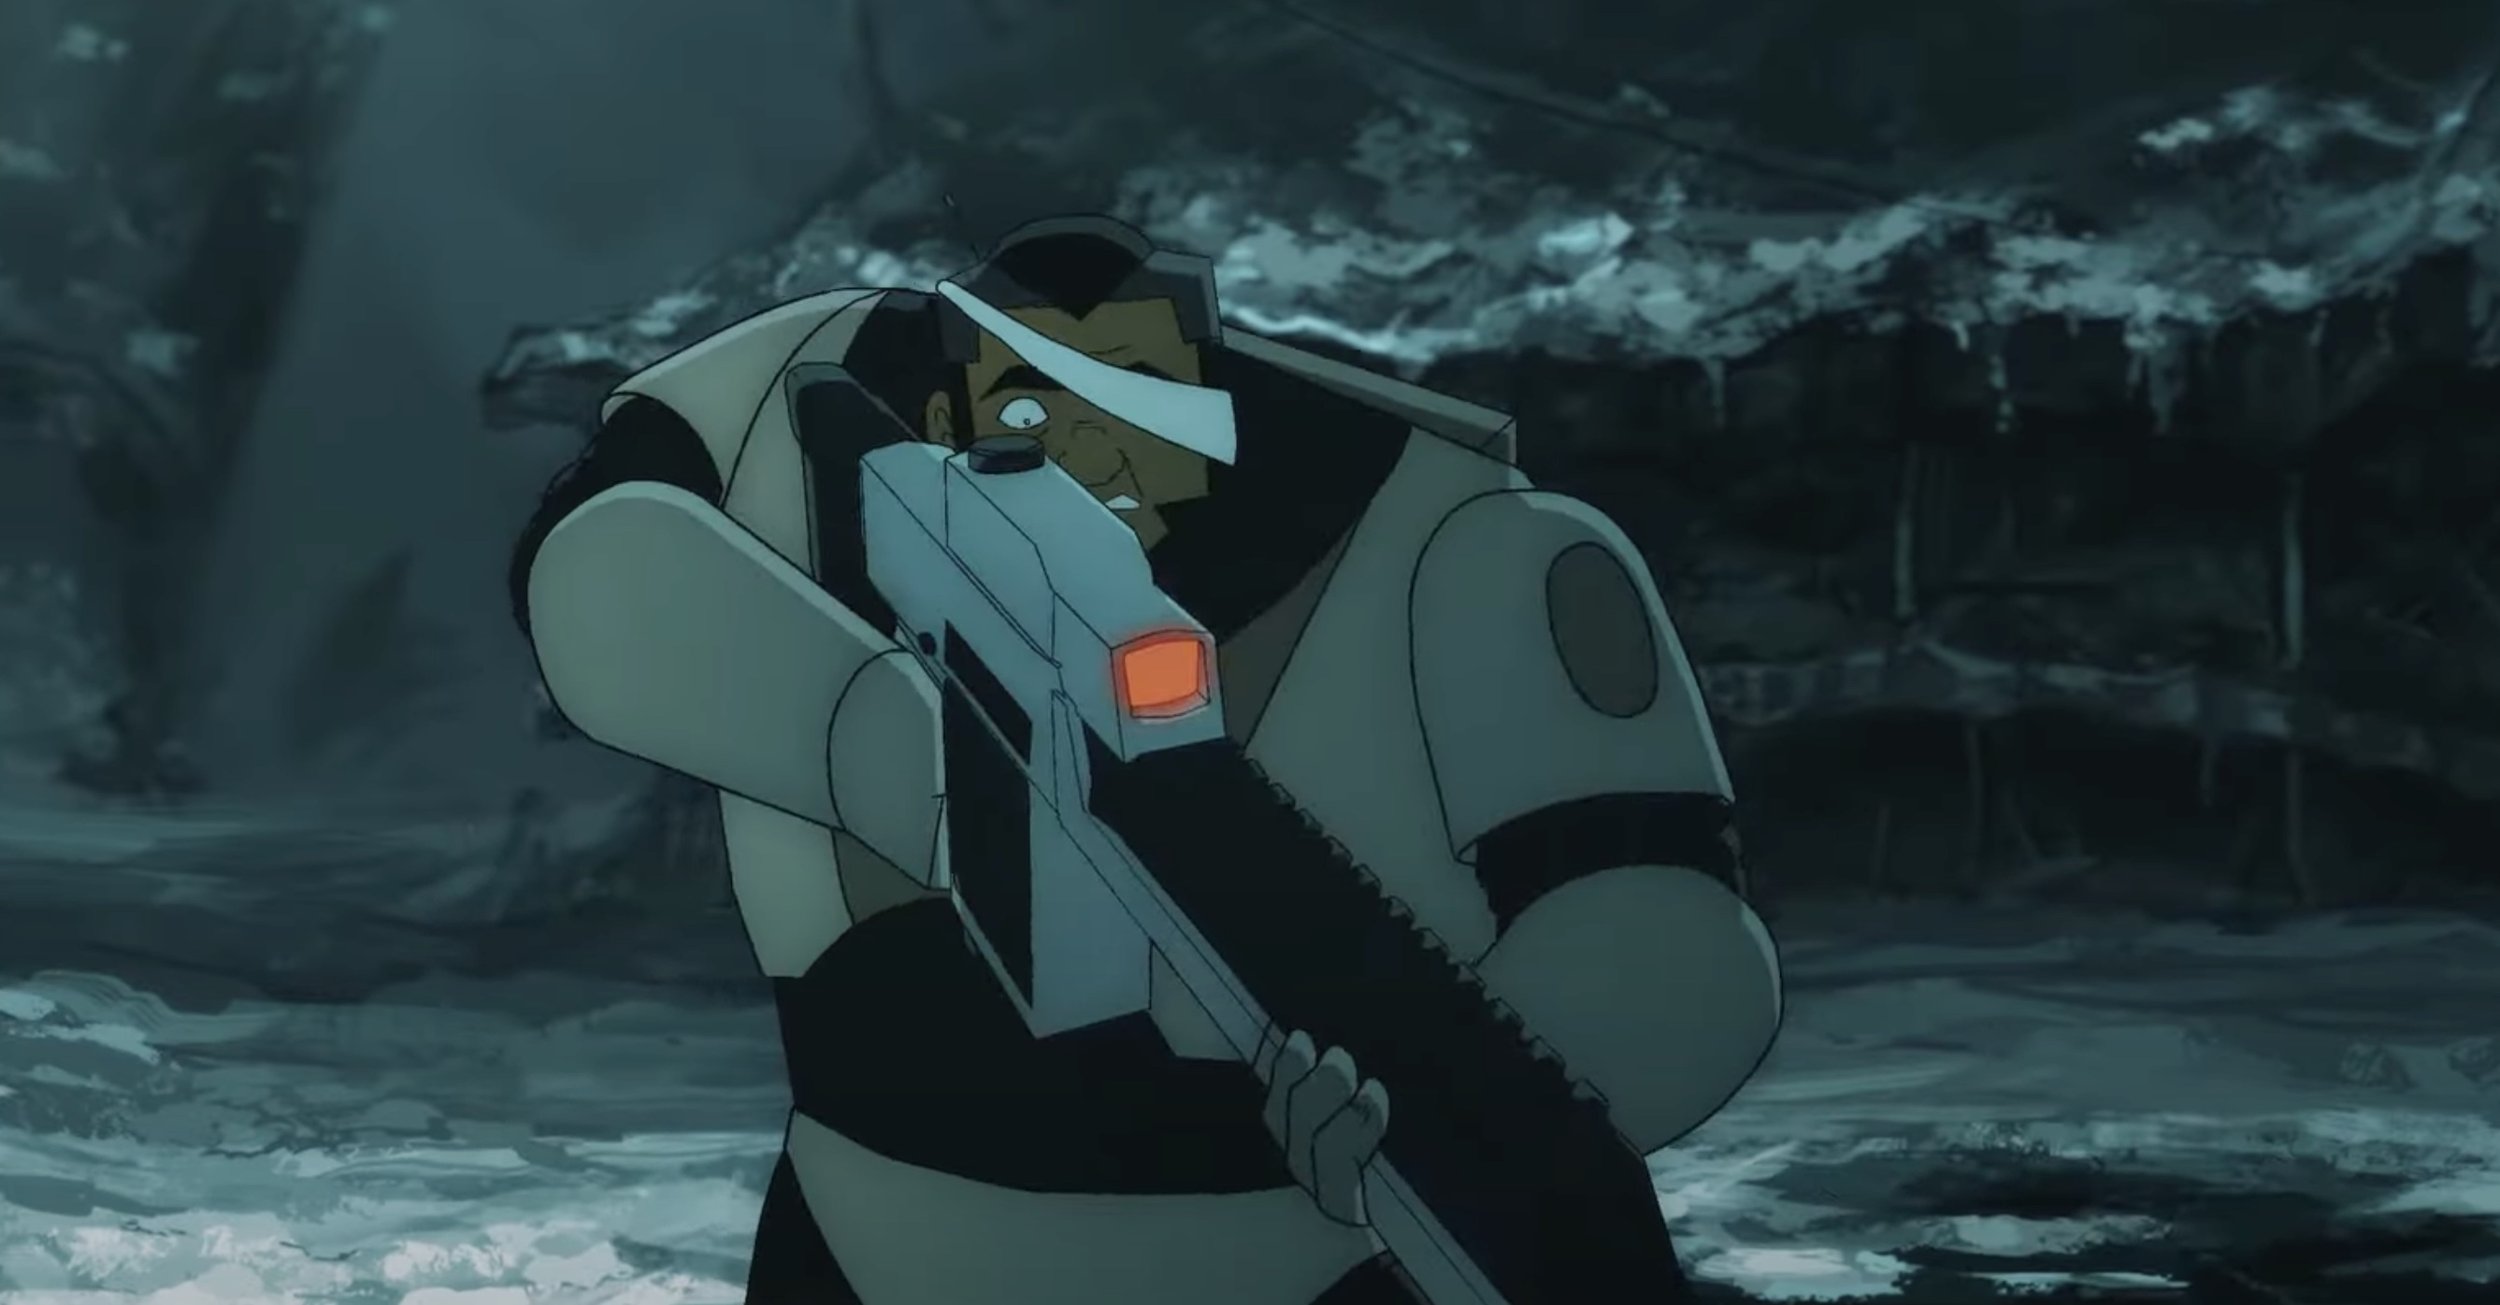 Awesome Must-Watch Sci-Fi/Horror Animated Short Film BEACON! — GeekTyrant